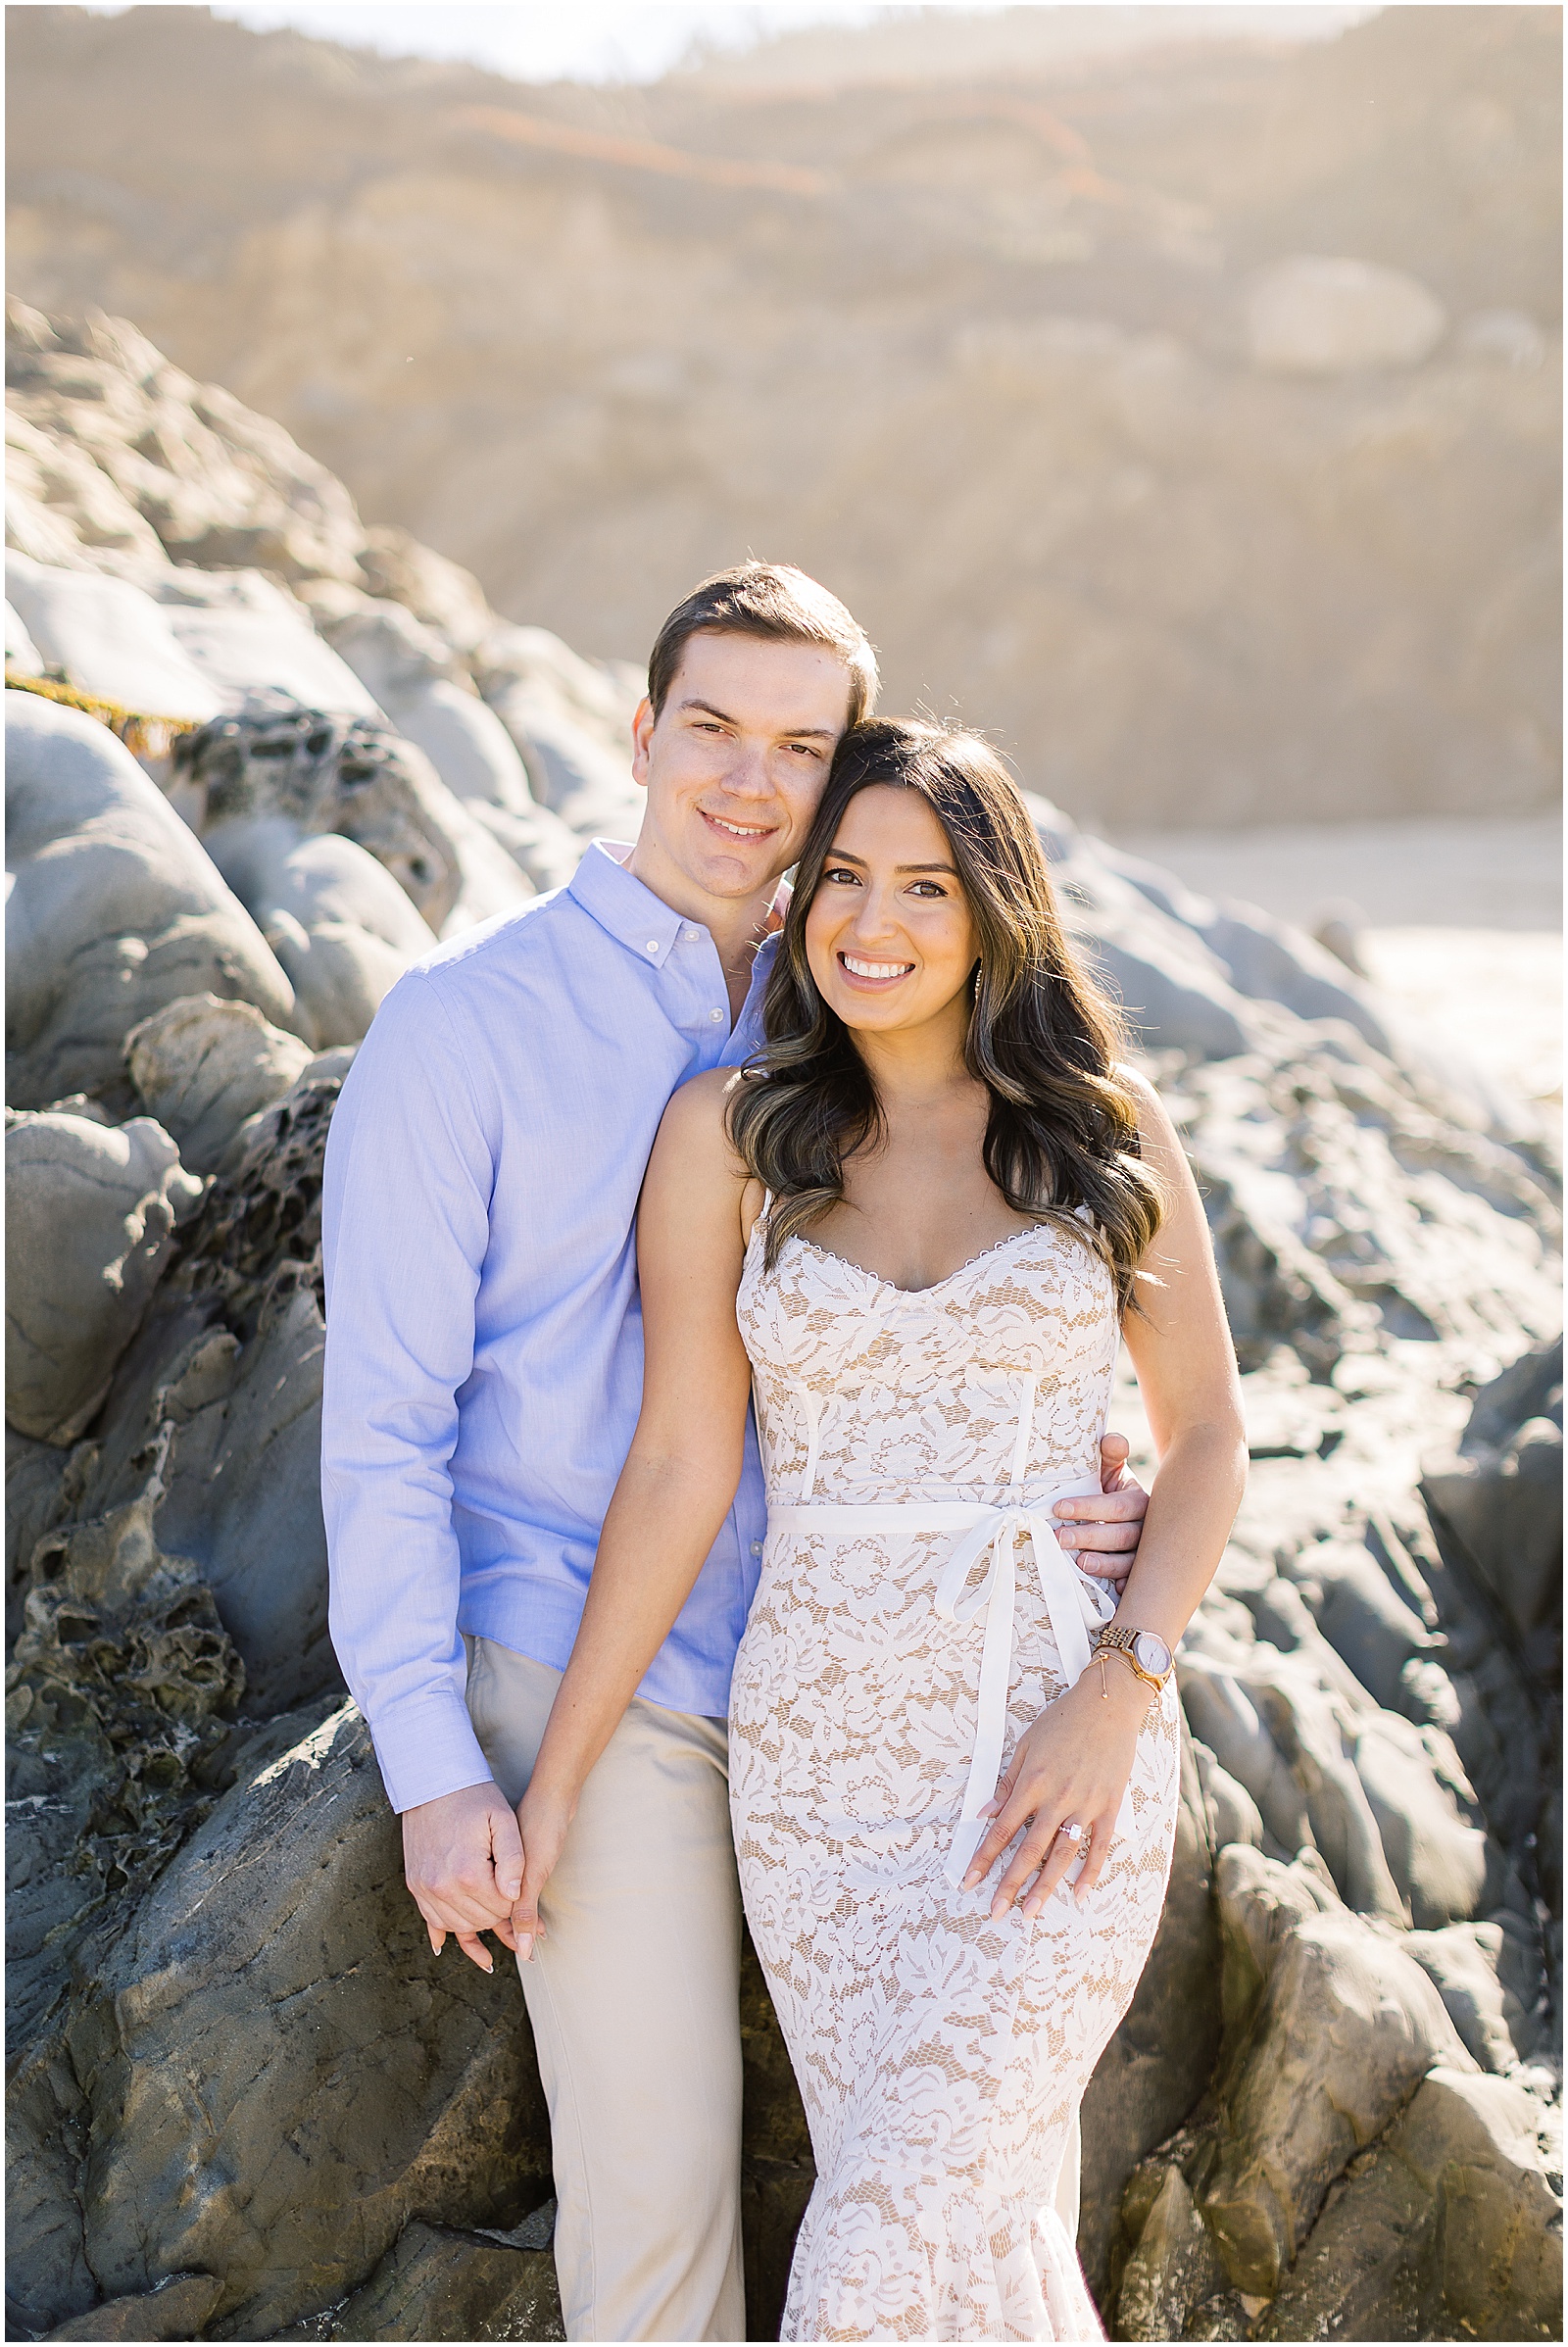 portrait of couple posing in front of rocks by the ocean by film photographer AGS Photo Art